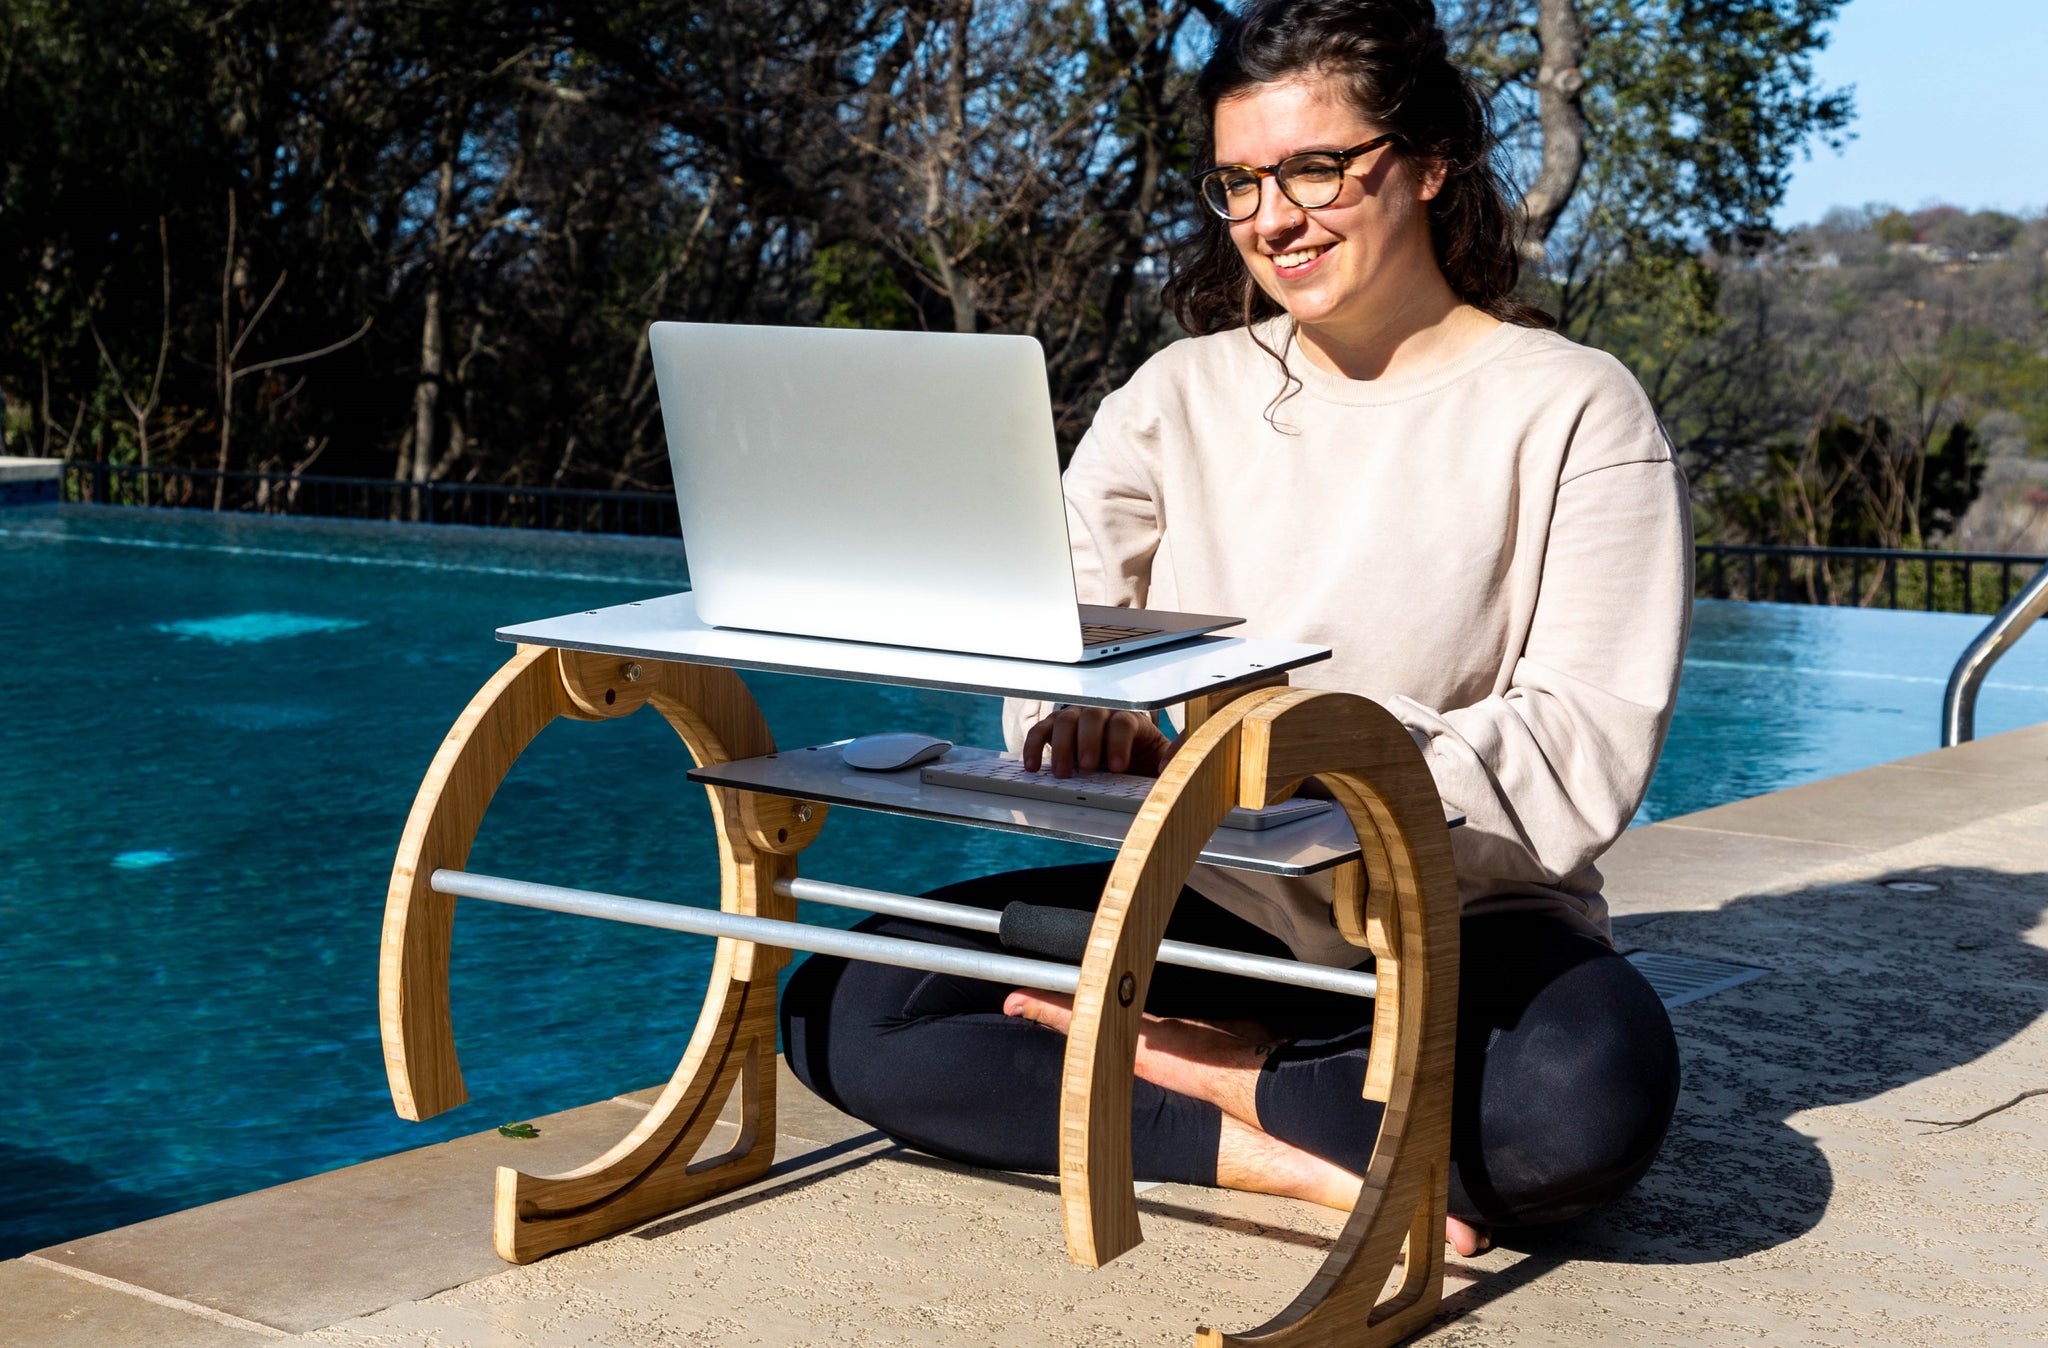 Woman sitting outside by pool cross-legged with laptop desk tray